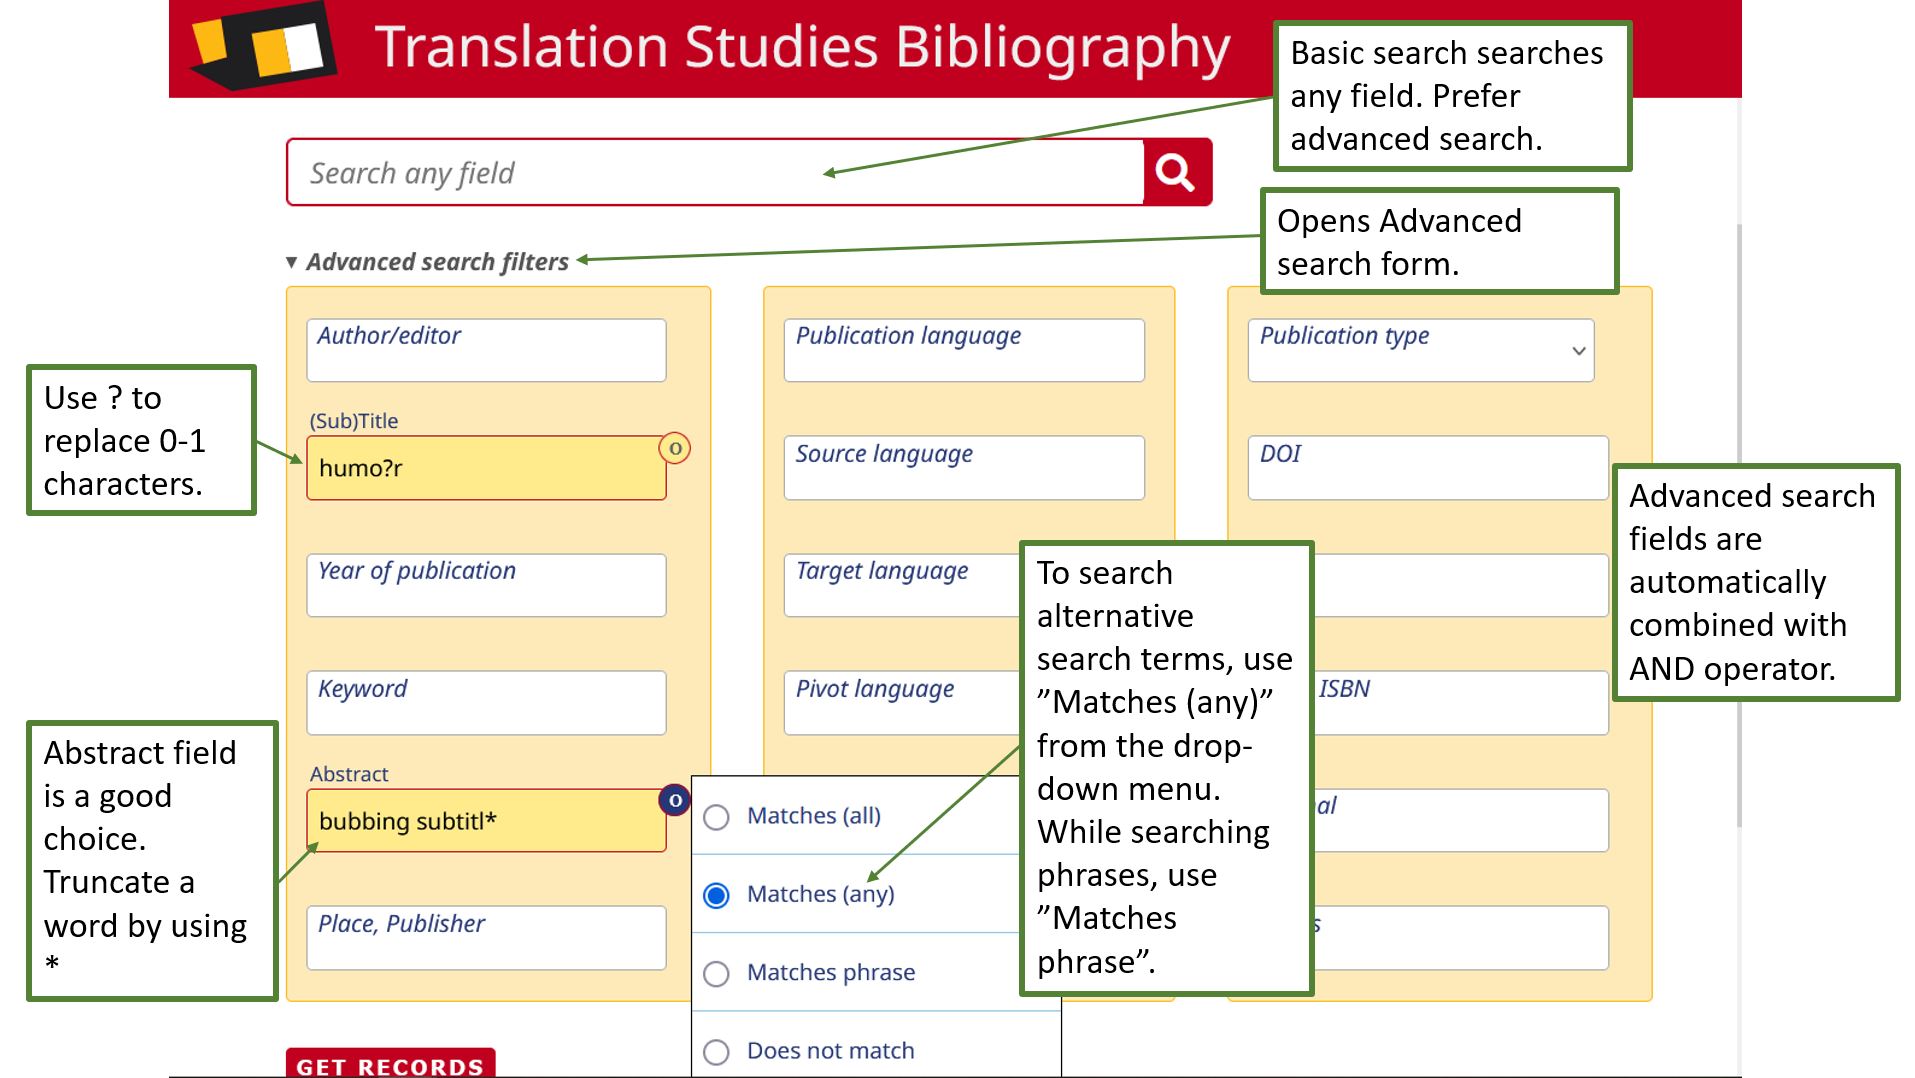 Translation Studies Bibliography and its advanced search form with some hints. Link "Advances search filters" open the advanced search form. To search alternative search terms, use "Matches any" from the drop-down menu. While searching phrases, use "Matches phrase". "Abstract" field is a good choice. Truncate a word by using asterisk. Advanced search fields are automatically combined with AND operator.